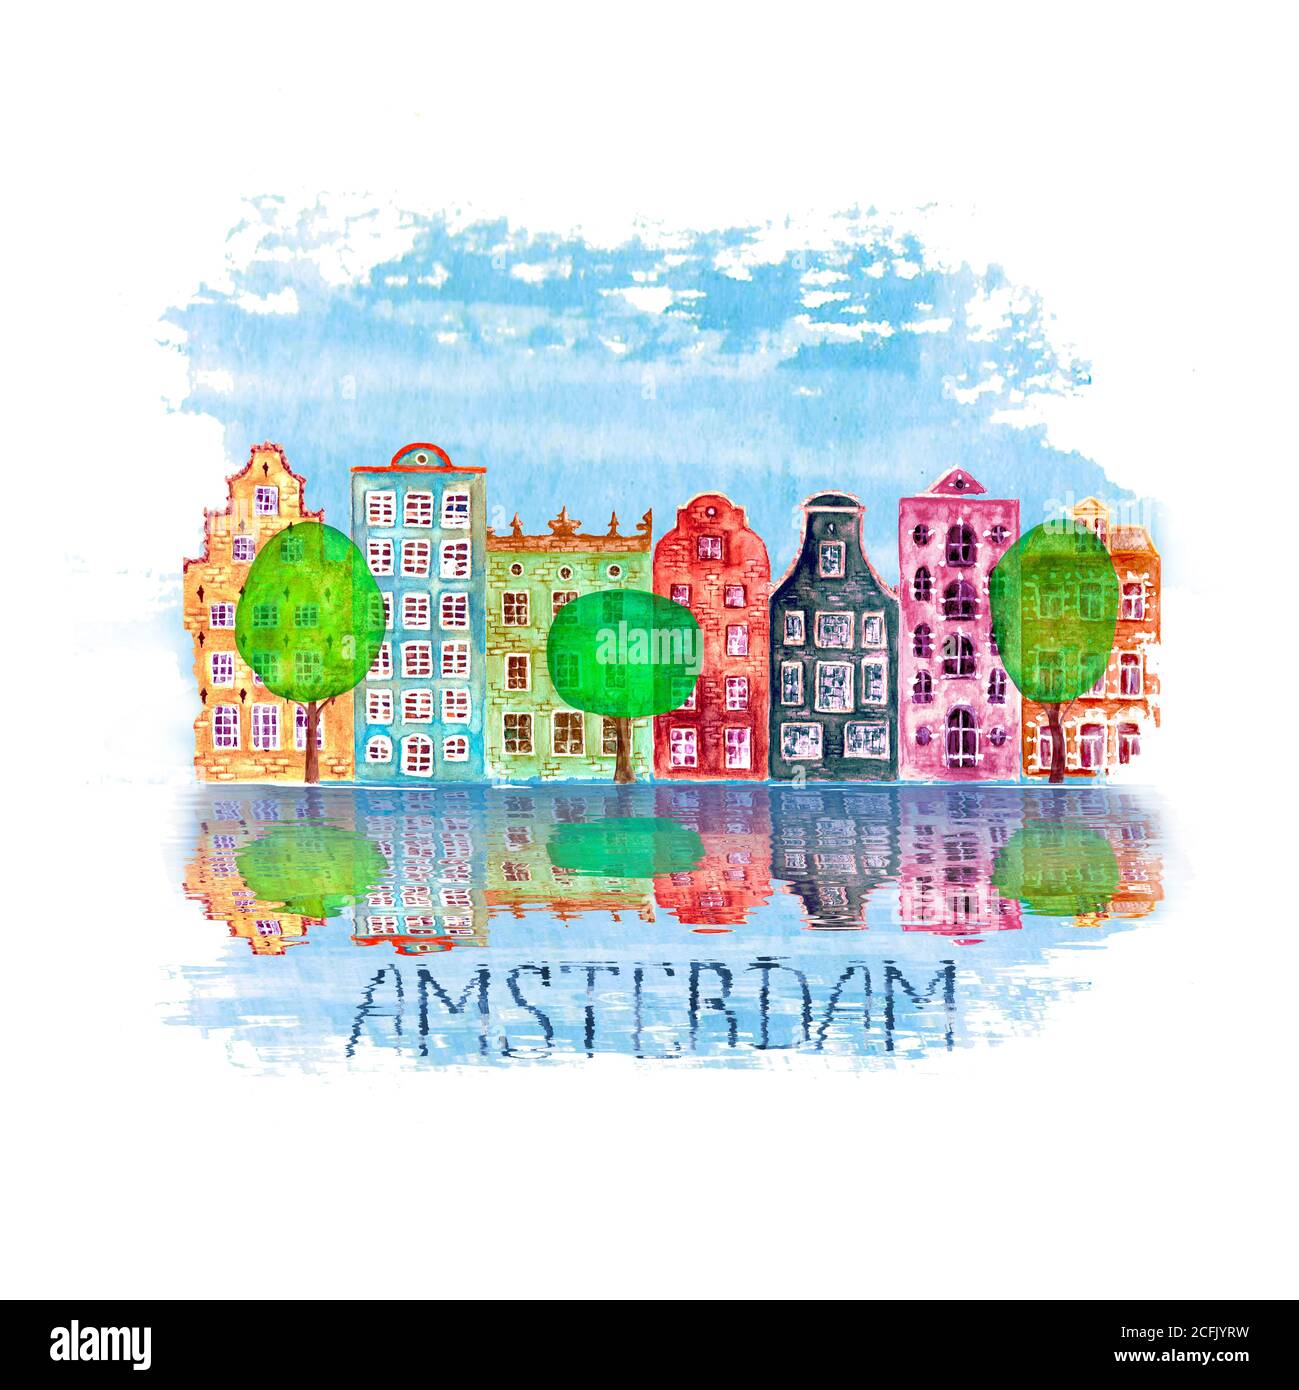 Amsterdam city illustration with watercolor hand painted old european houses, trees and reflections in water on blue teal stain isolated on white back Stock Photo